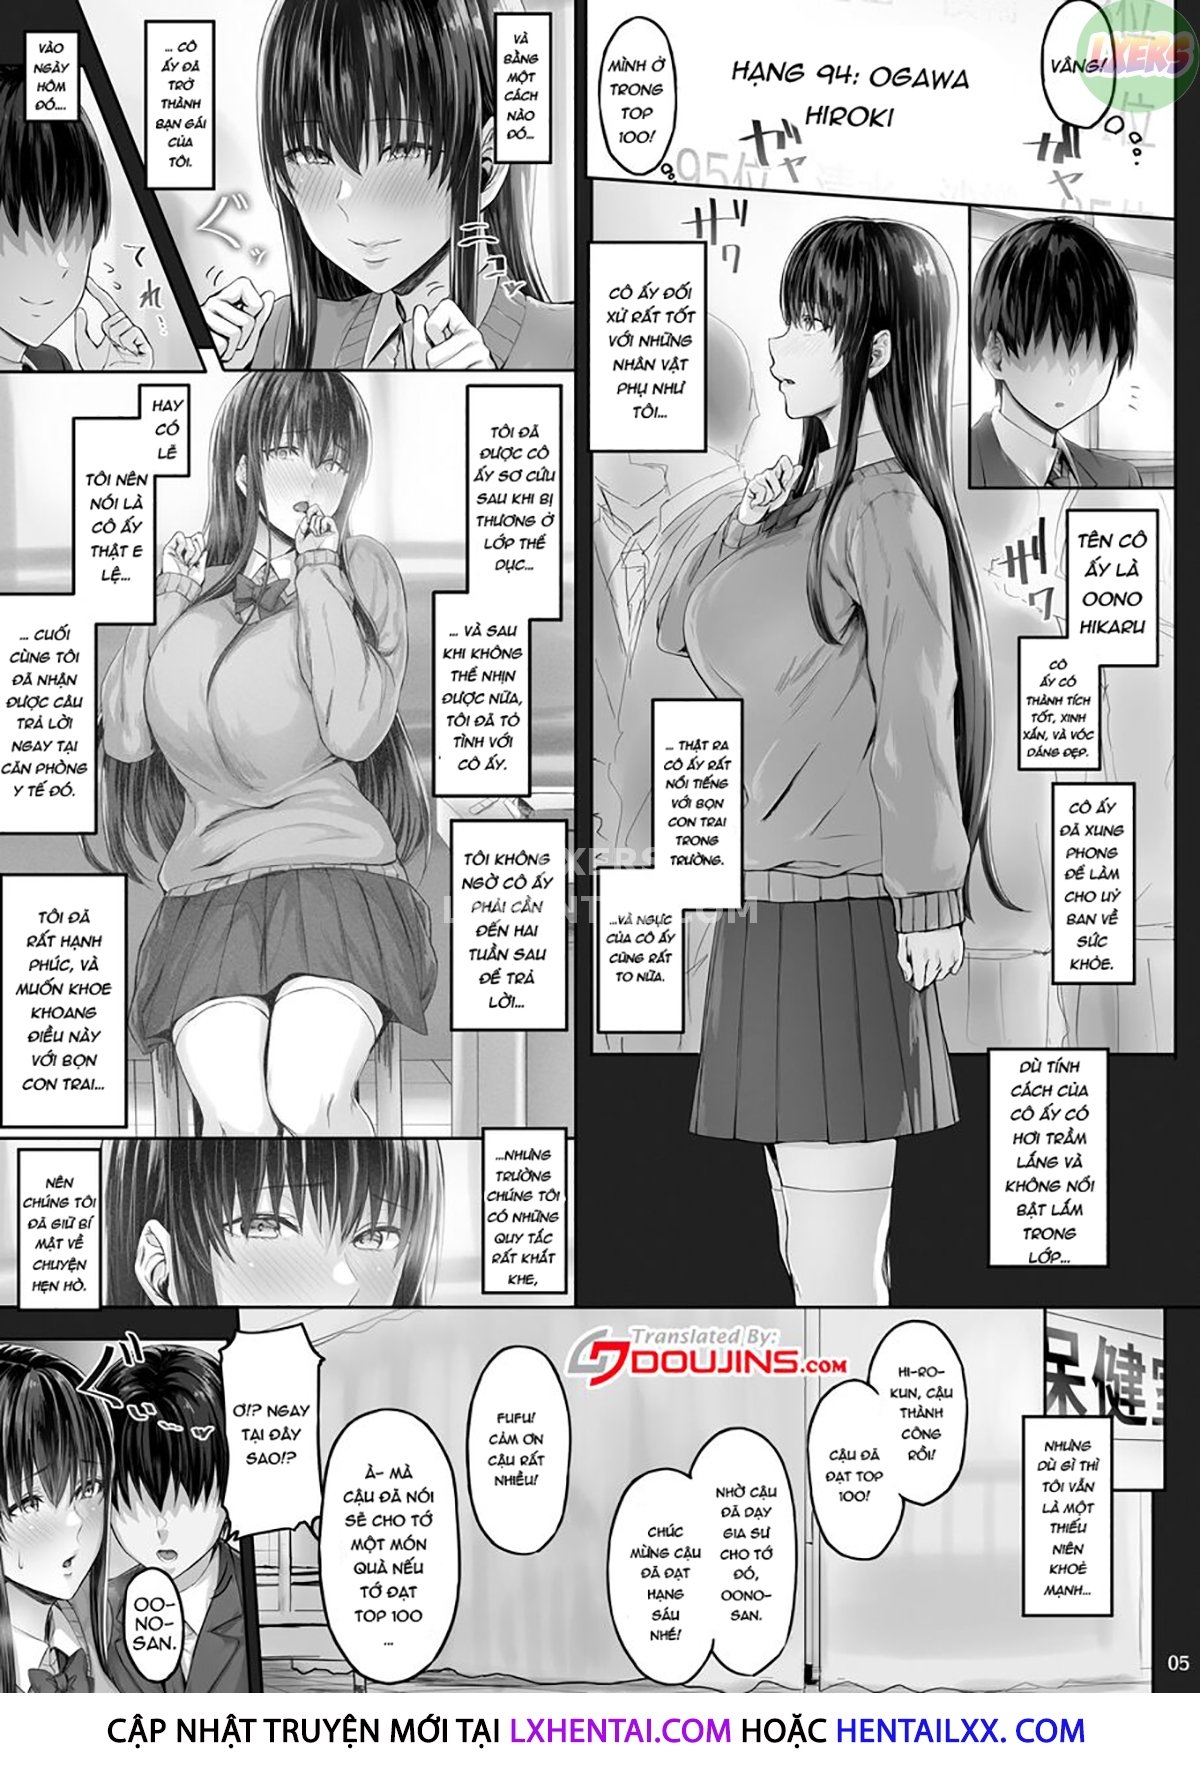 Xem ảnh What My Girlfriend Does That I Don't Know About - Chapter 1 - 164606893140_0 - Hentai24h.Tv